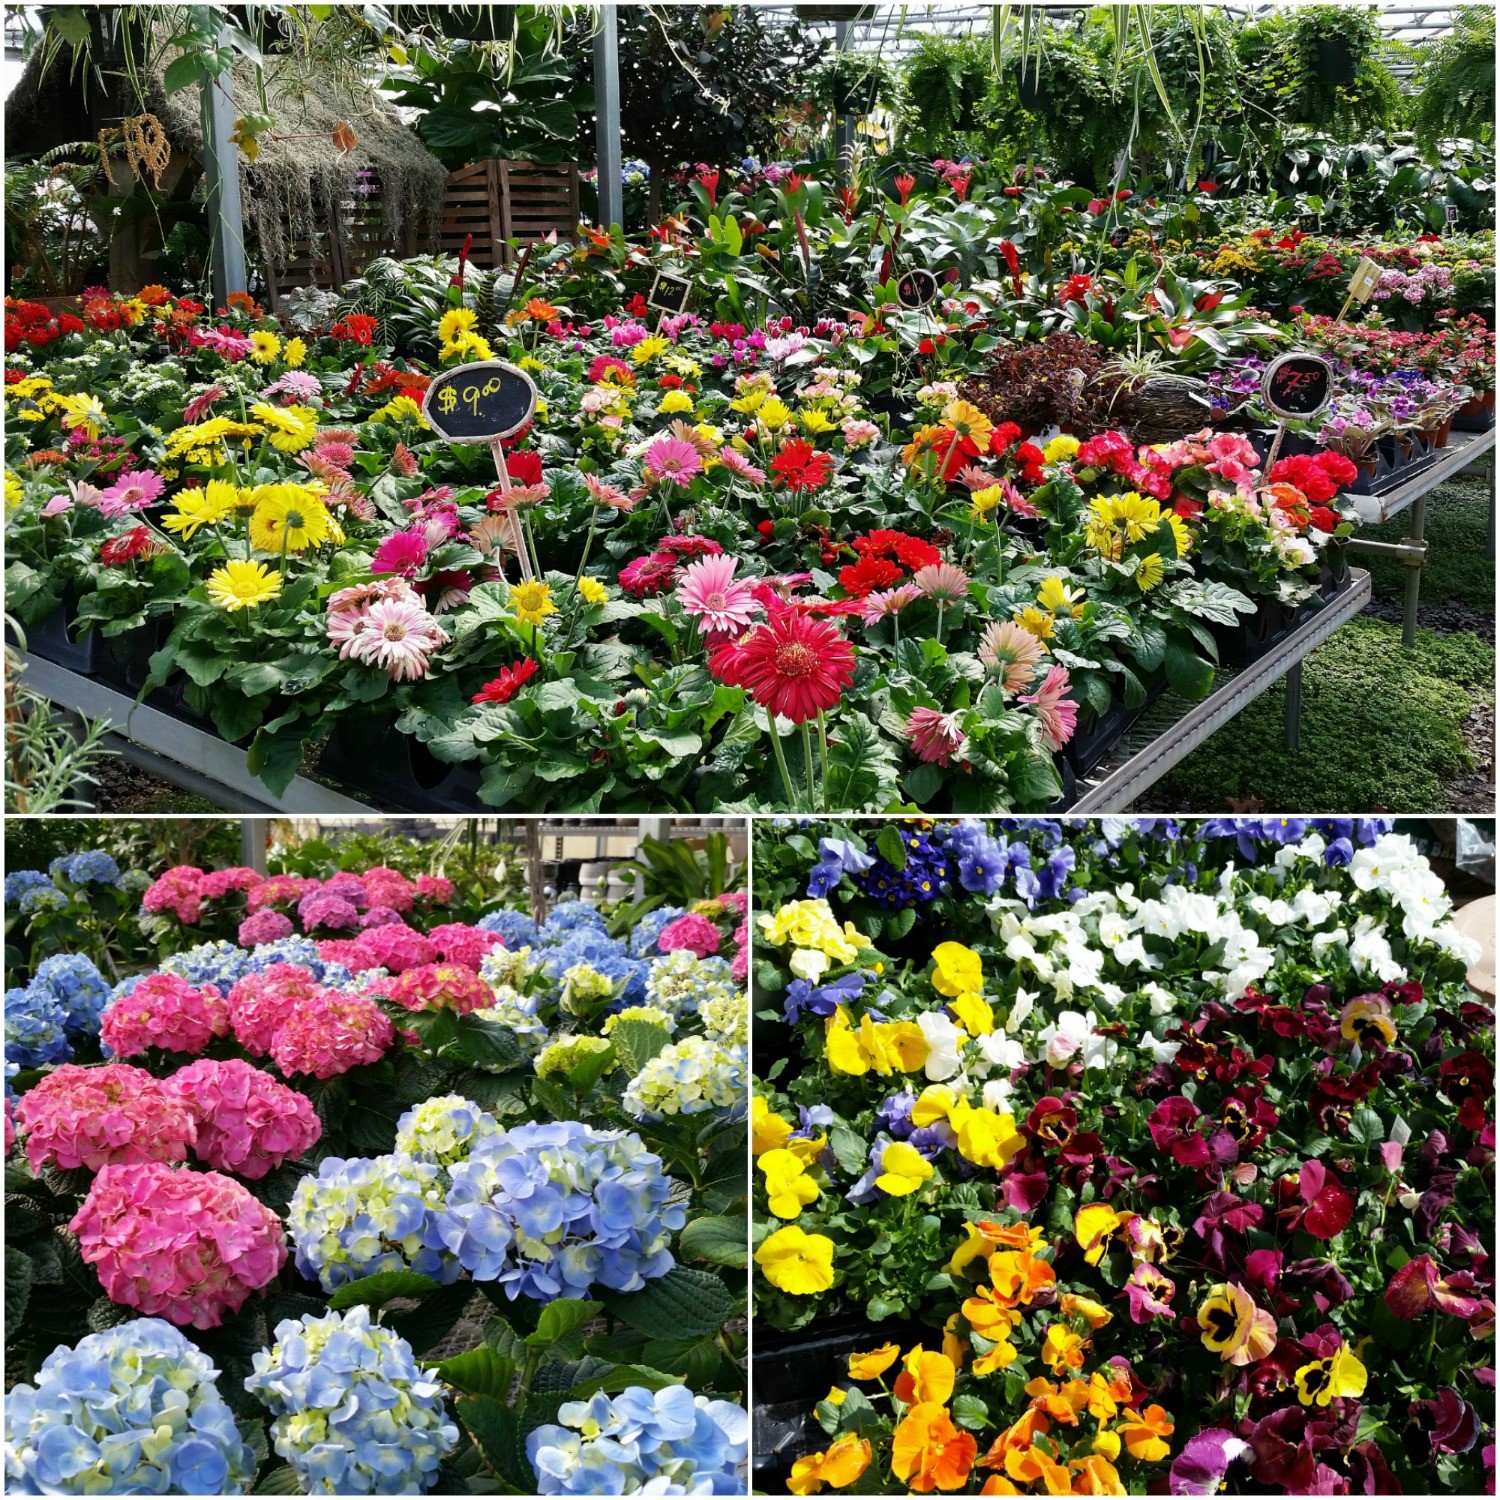 Colorful assortment of spring plants